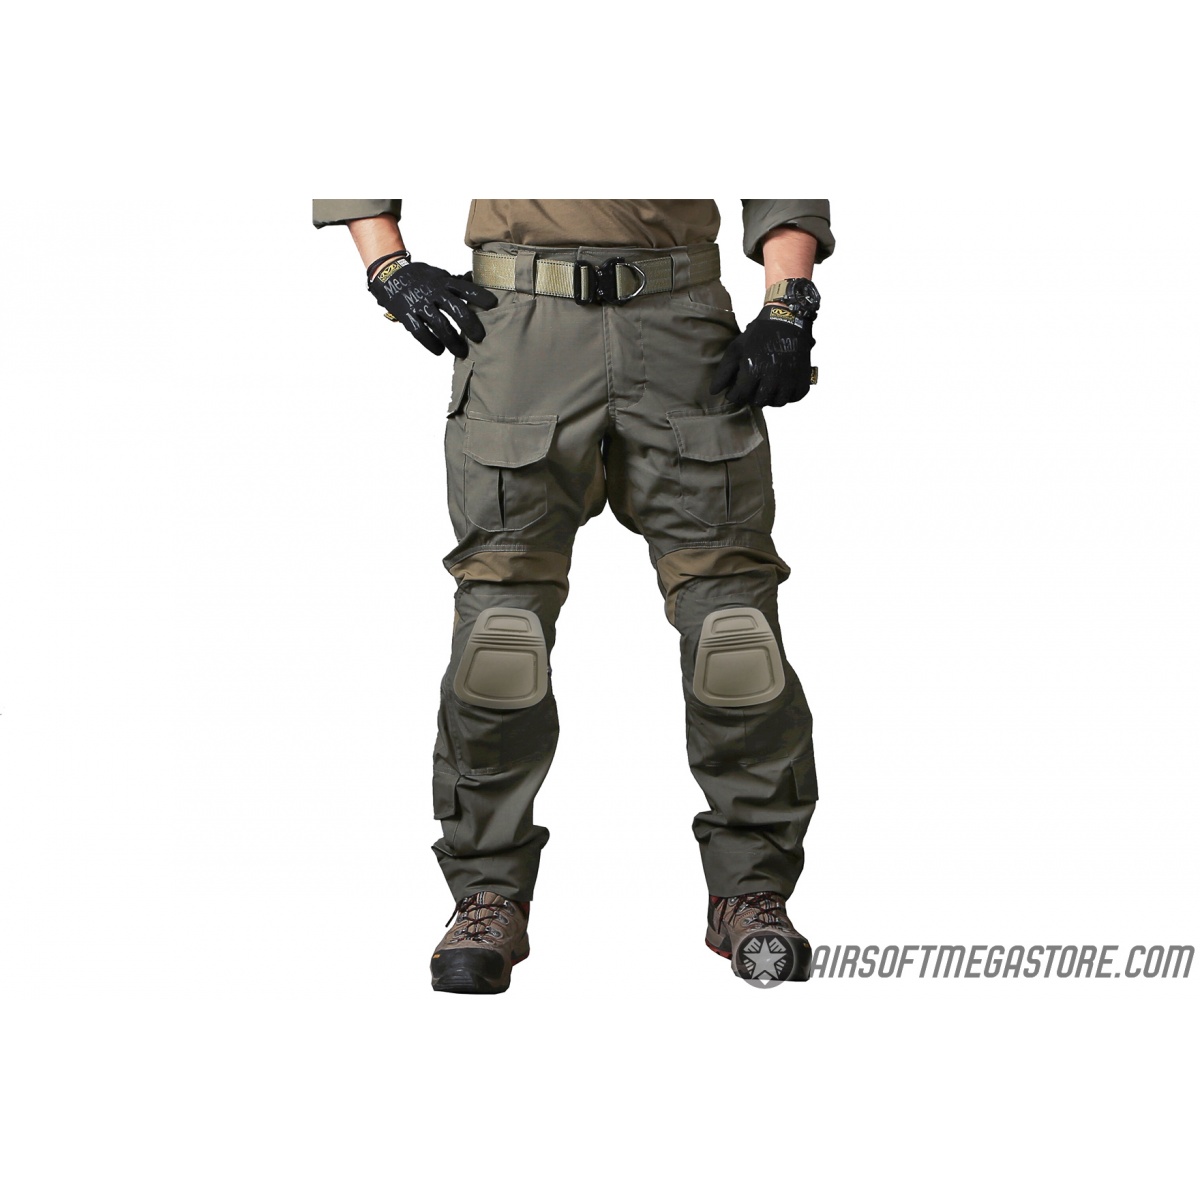 IDOGEAR G3 Combat Pants with Knee Pads Gen3 Tactical Airsoft Trousers  MultiCam  eBay